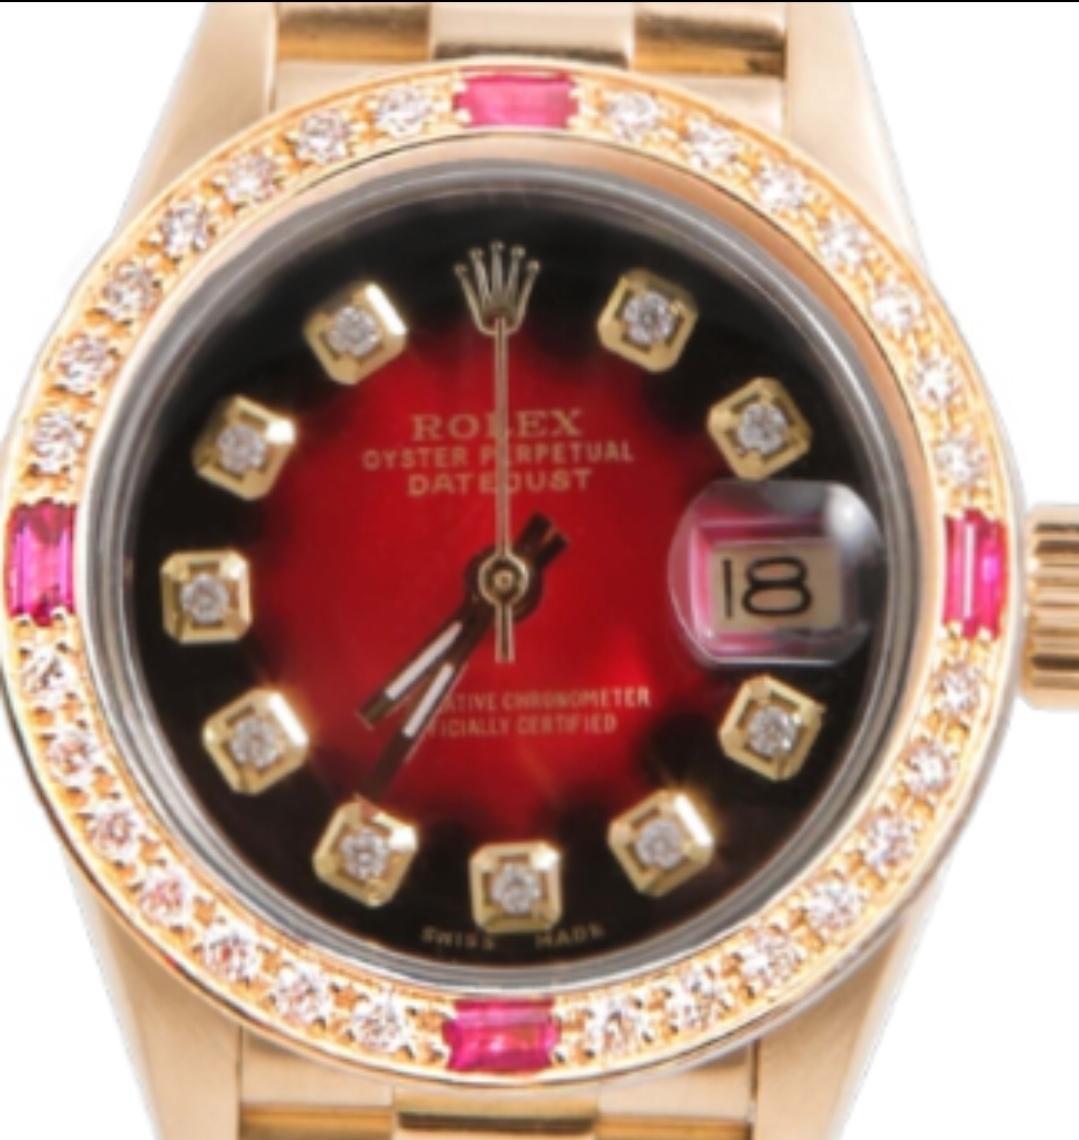 (Watch Description) 
Brand - Rolex
Gender - Ladies 
Model - 6917 Presidential
Metals - Yellow Solid Gold
Case size - 26mm
Bezel - Yellow gold Diamond
Crystal - Sapphire
Movement - Automatic Cal.2035
Dial - Refinished Red Diamond
Wrist band - Yellow